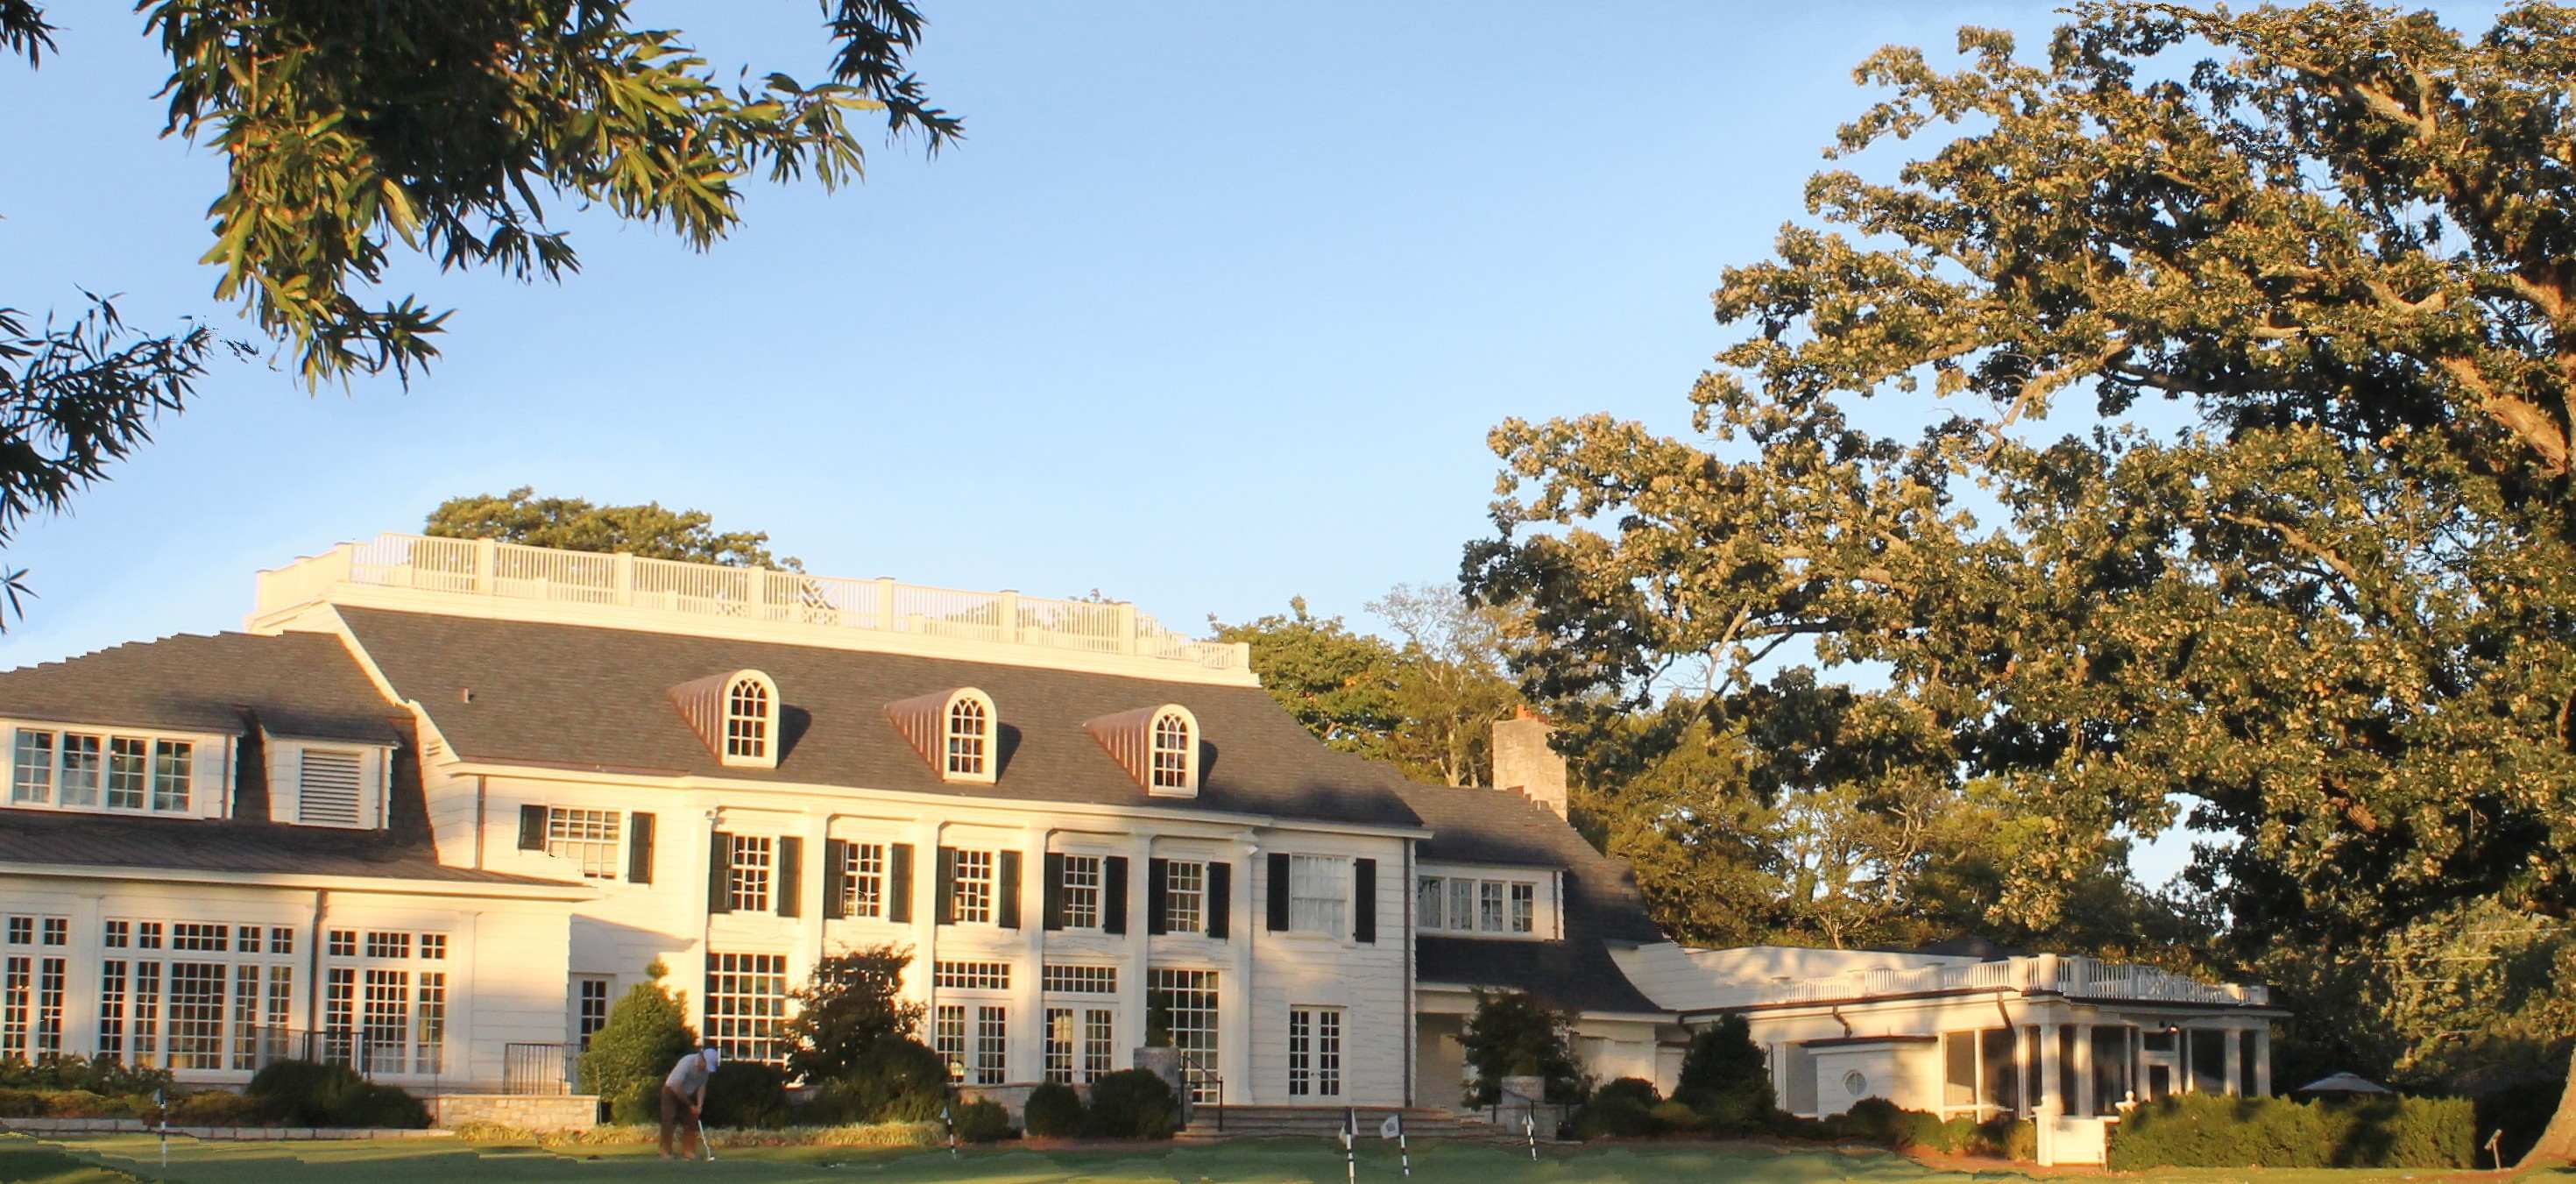 Belle Meade Country Club, Nashville TN